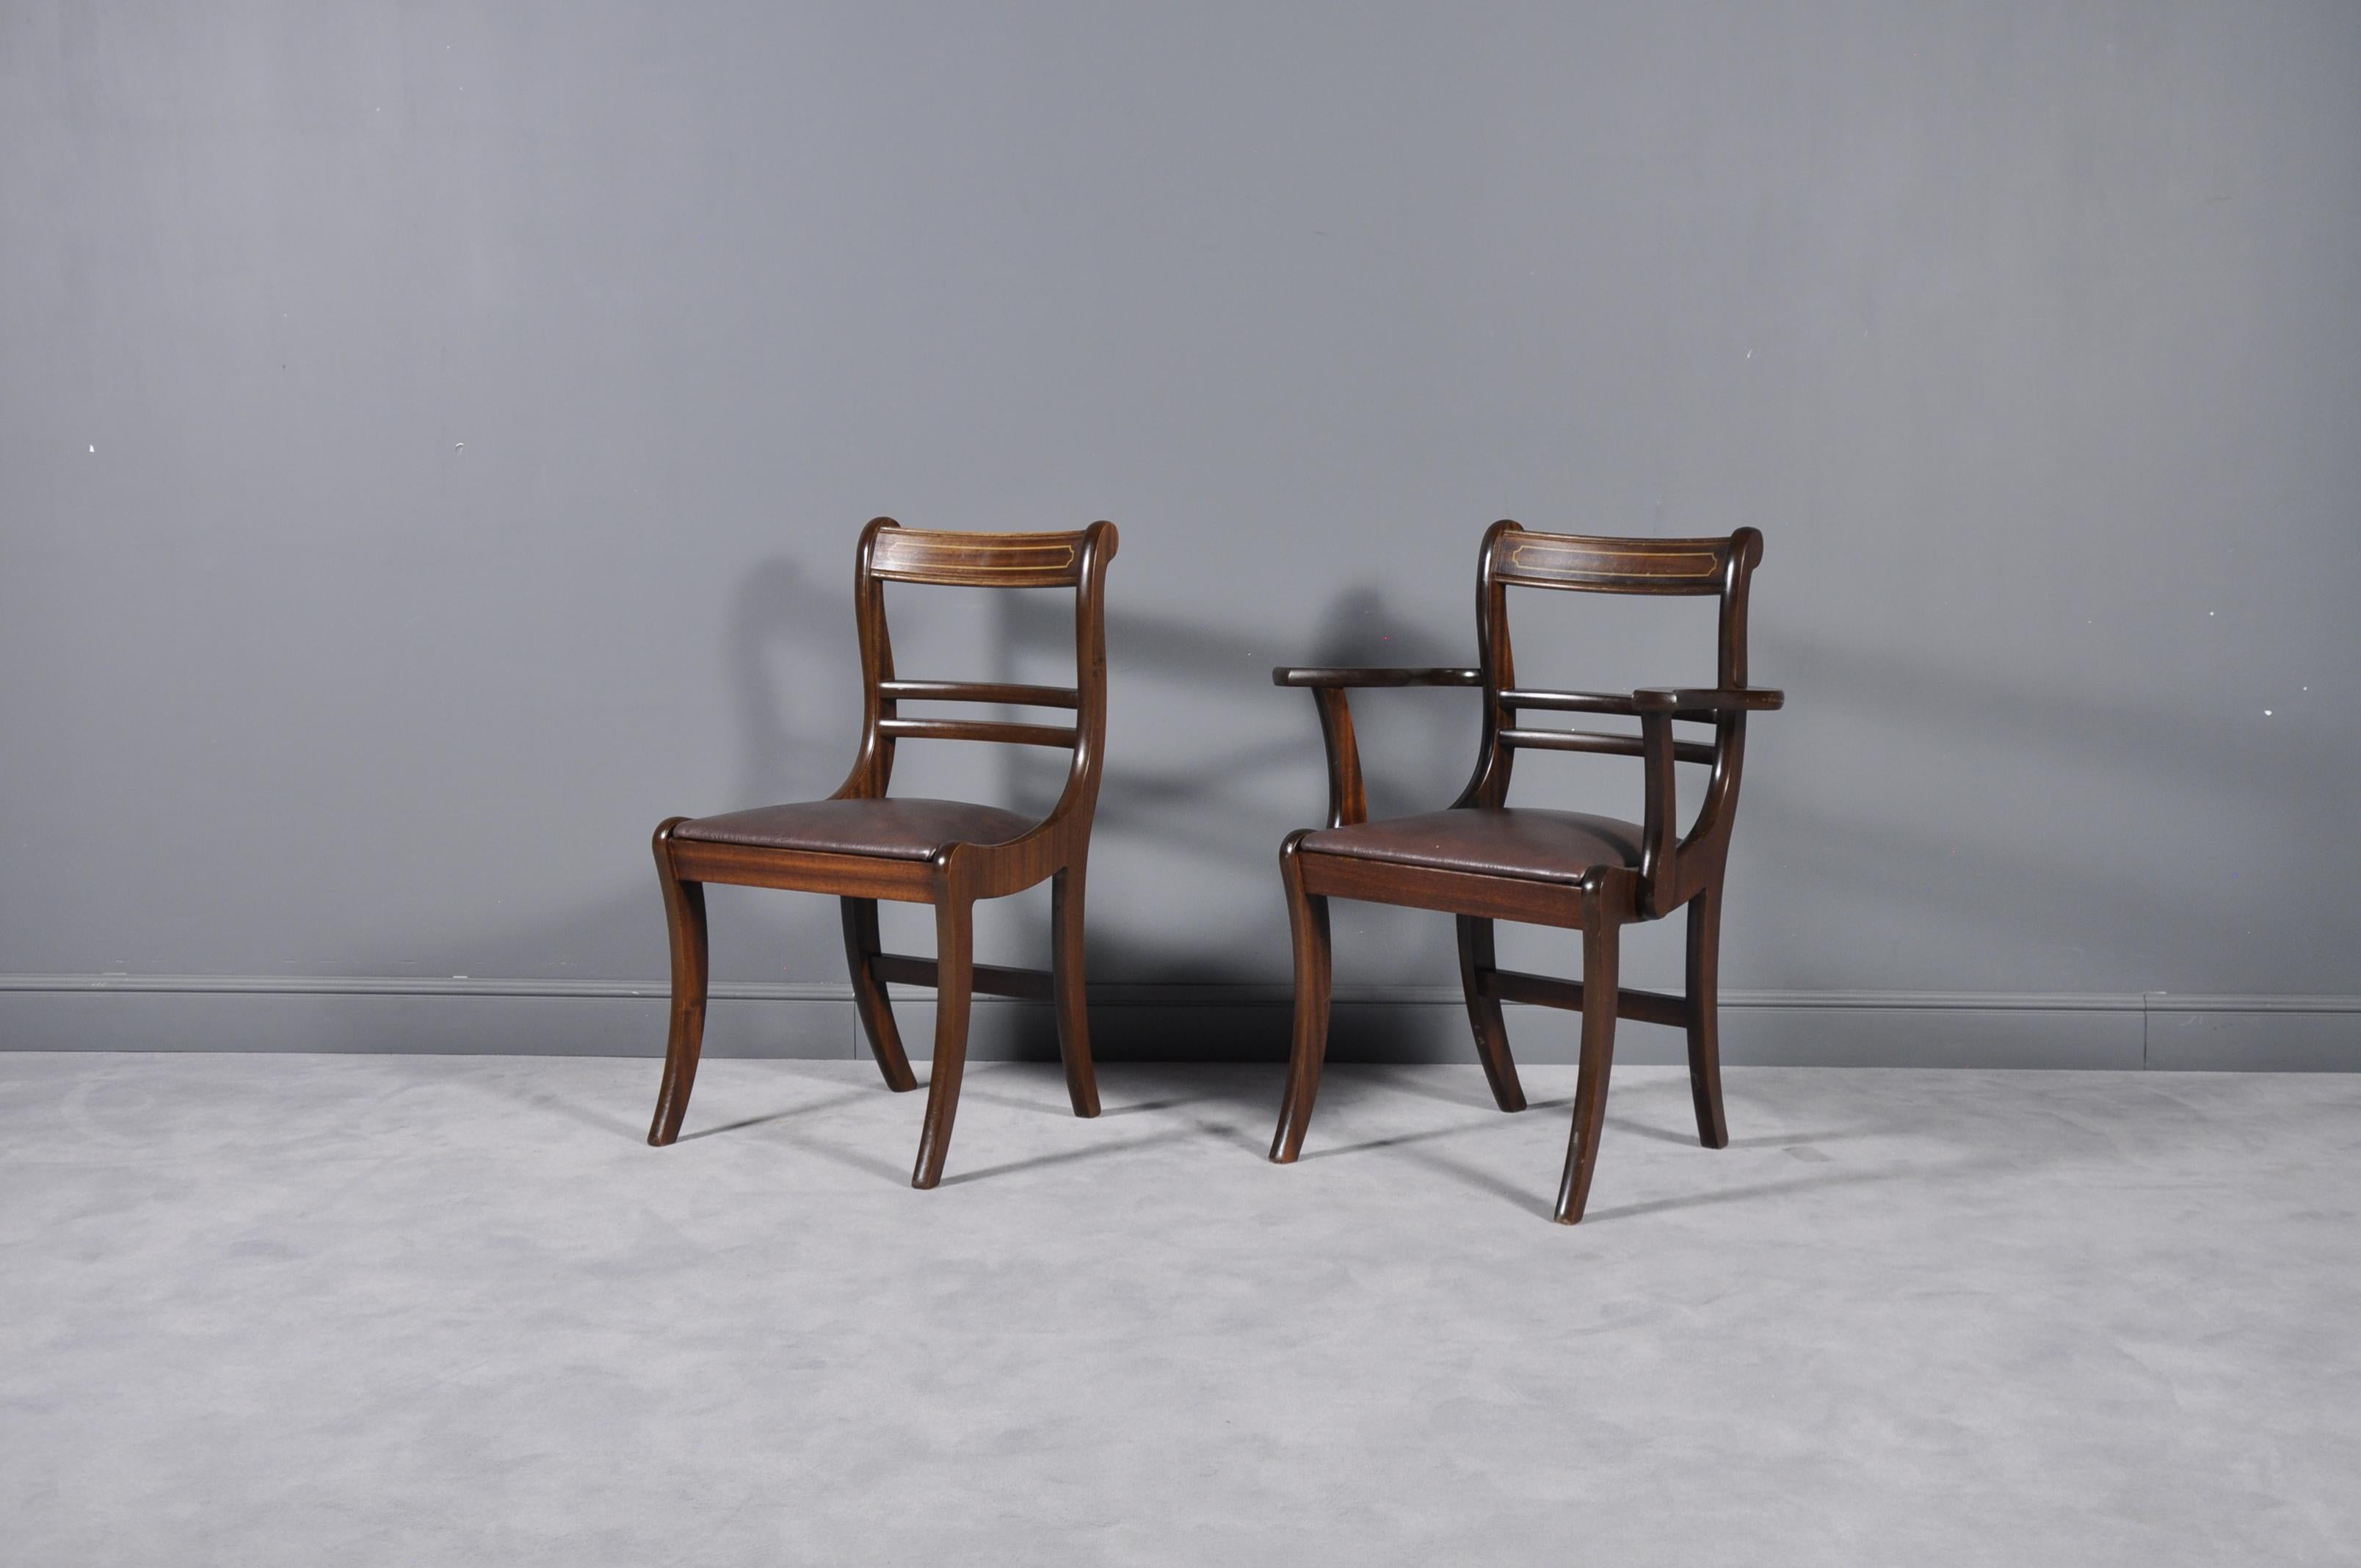 Set of Six 19th Century English Neoclassical Dining Chairs im Angebot 3